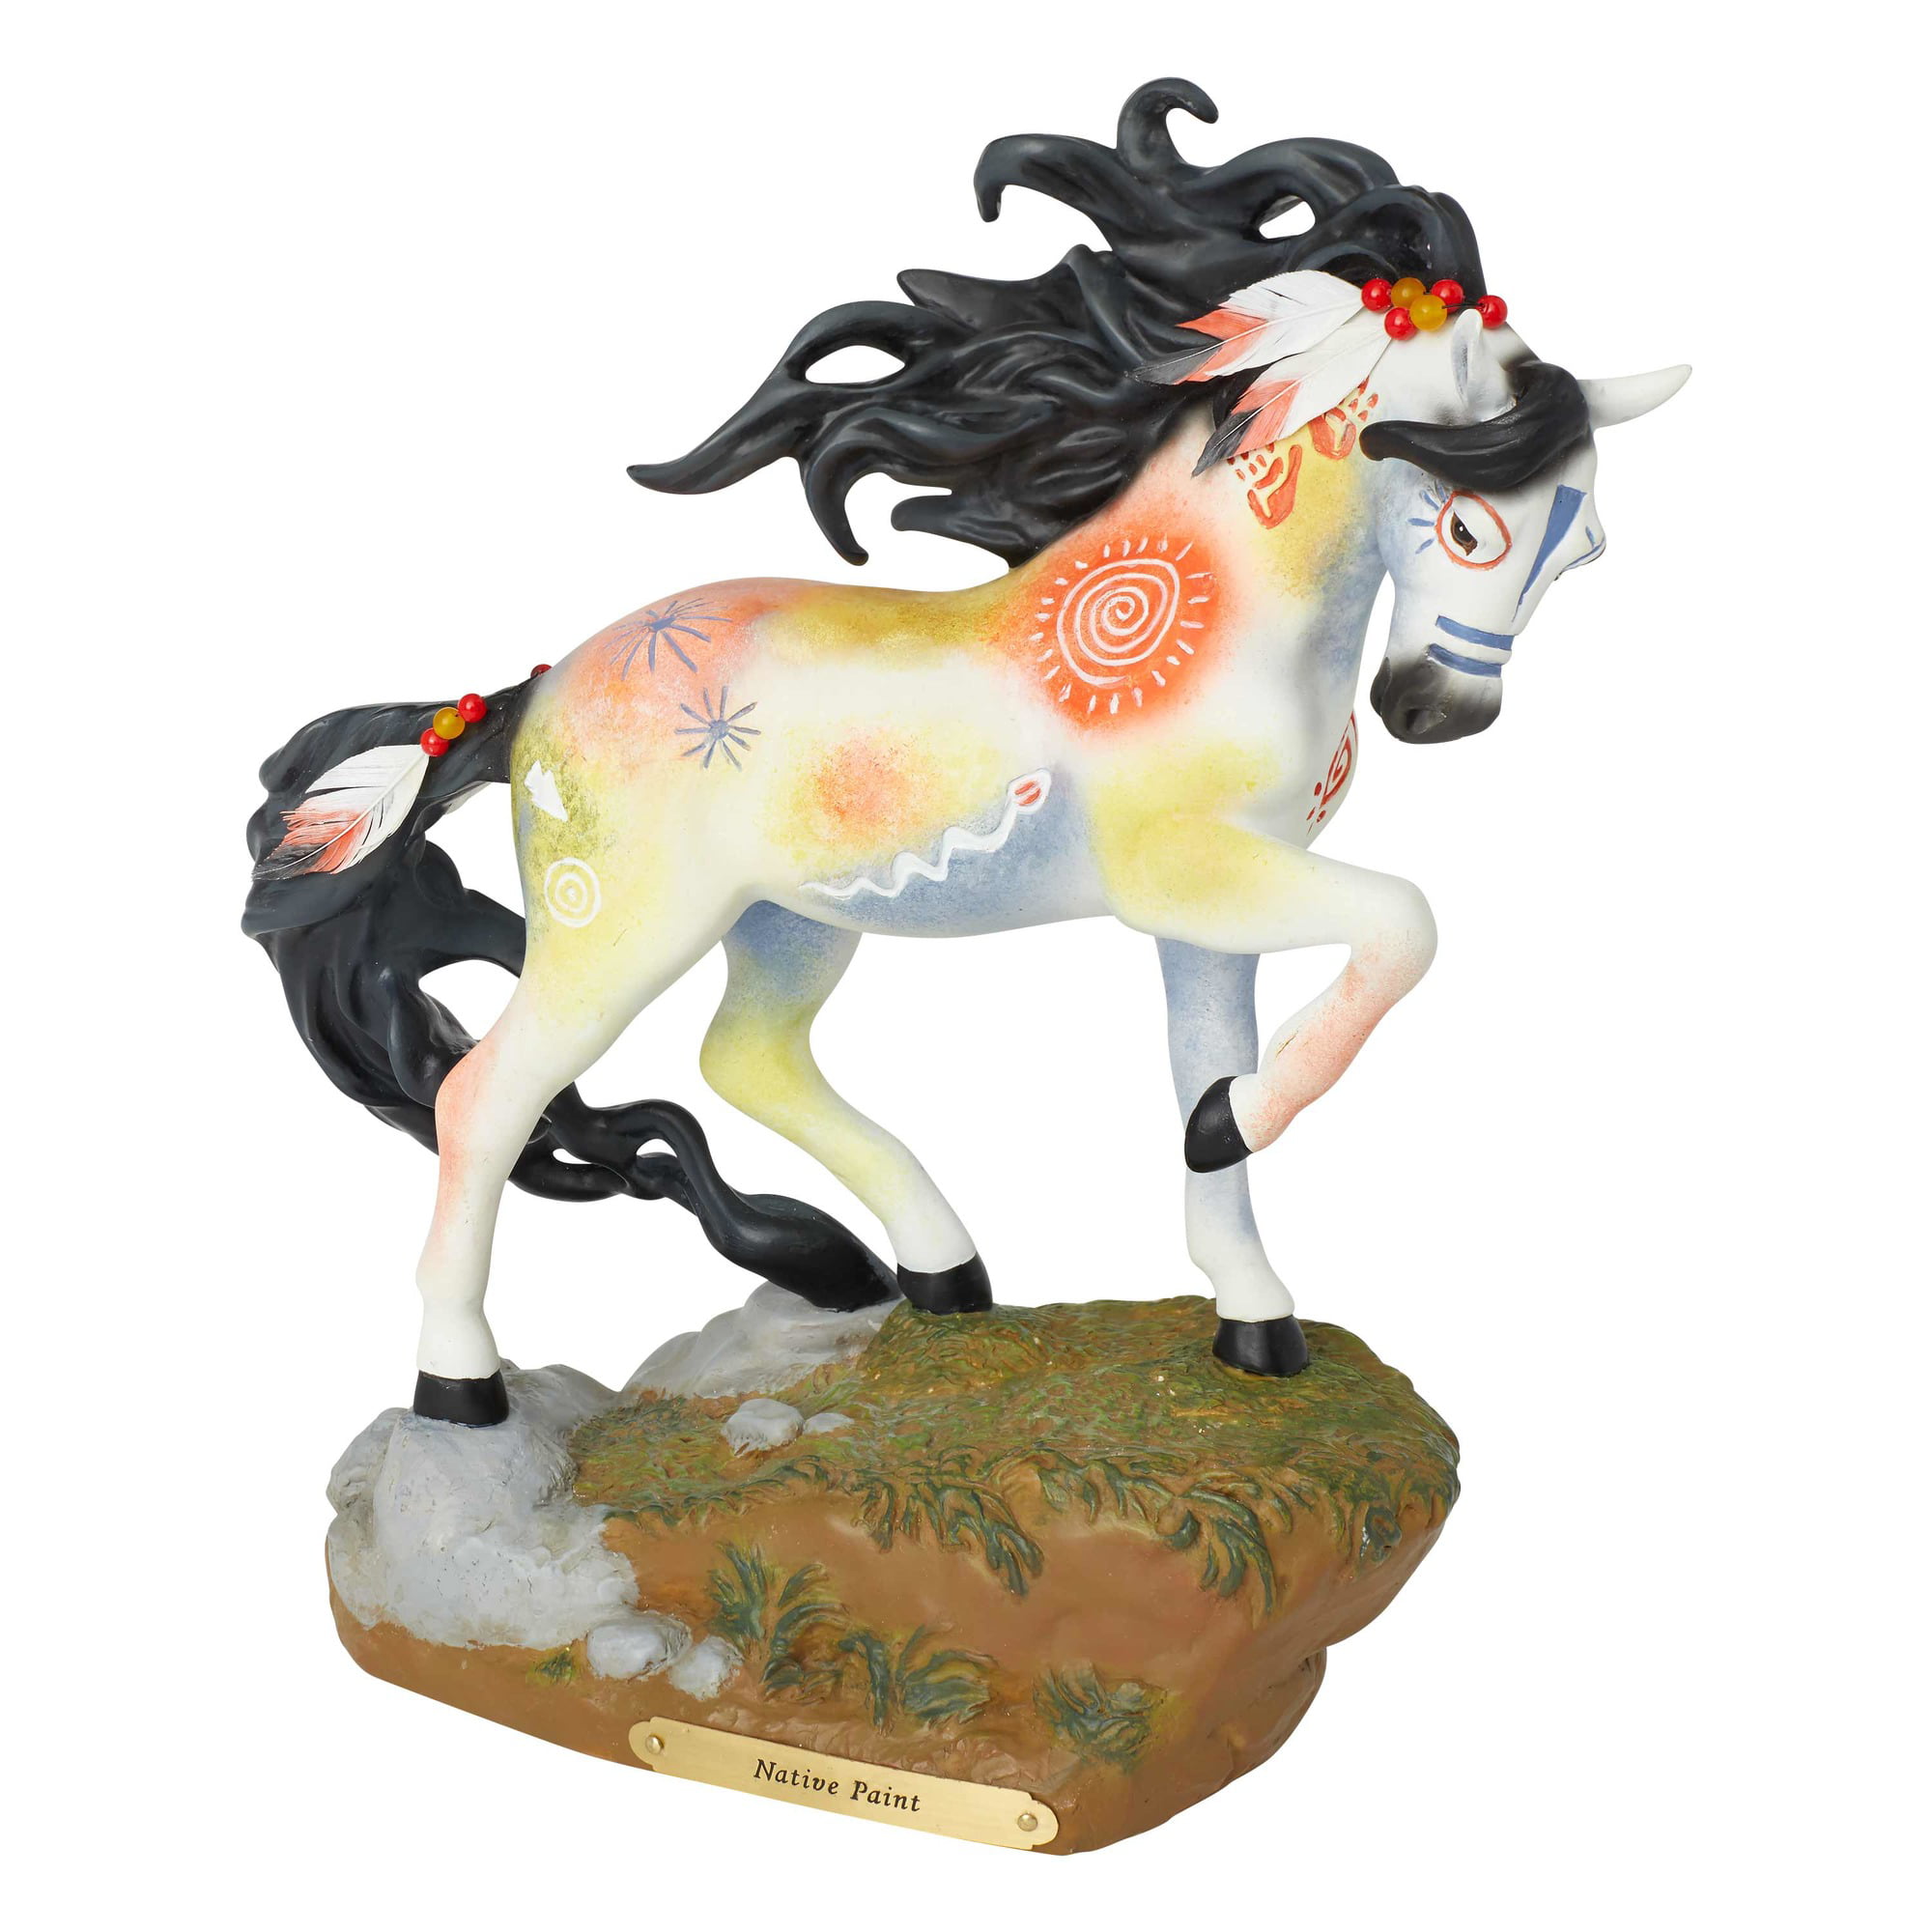 New Trail of Painted Ponies NATIVE PEOPLE'S PONY FIGURINE Retired Westland 